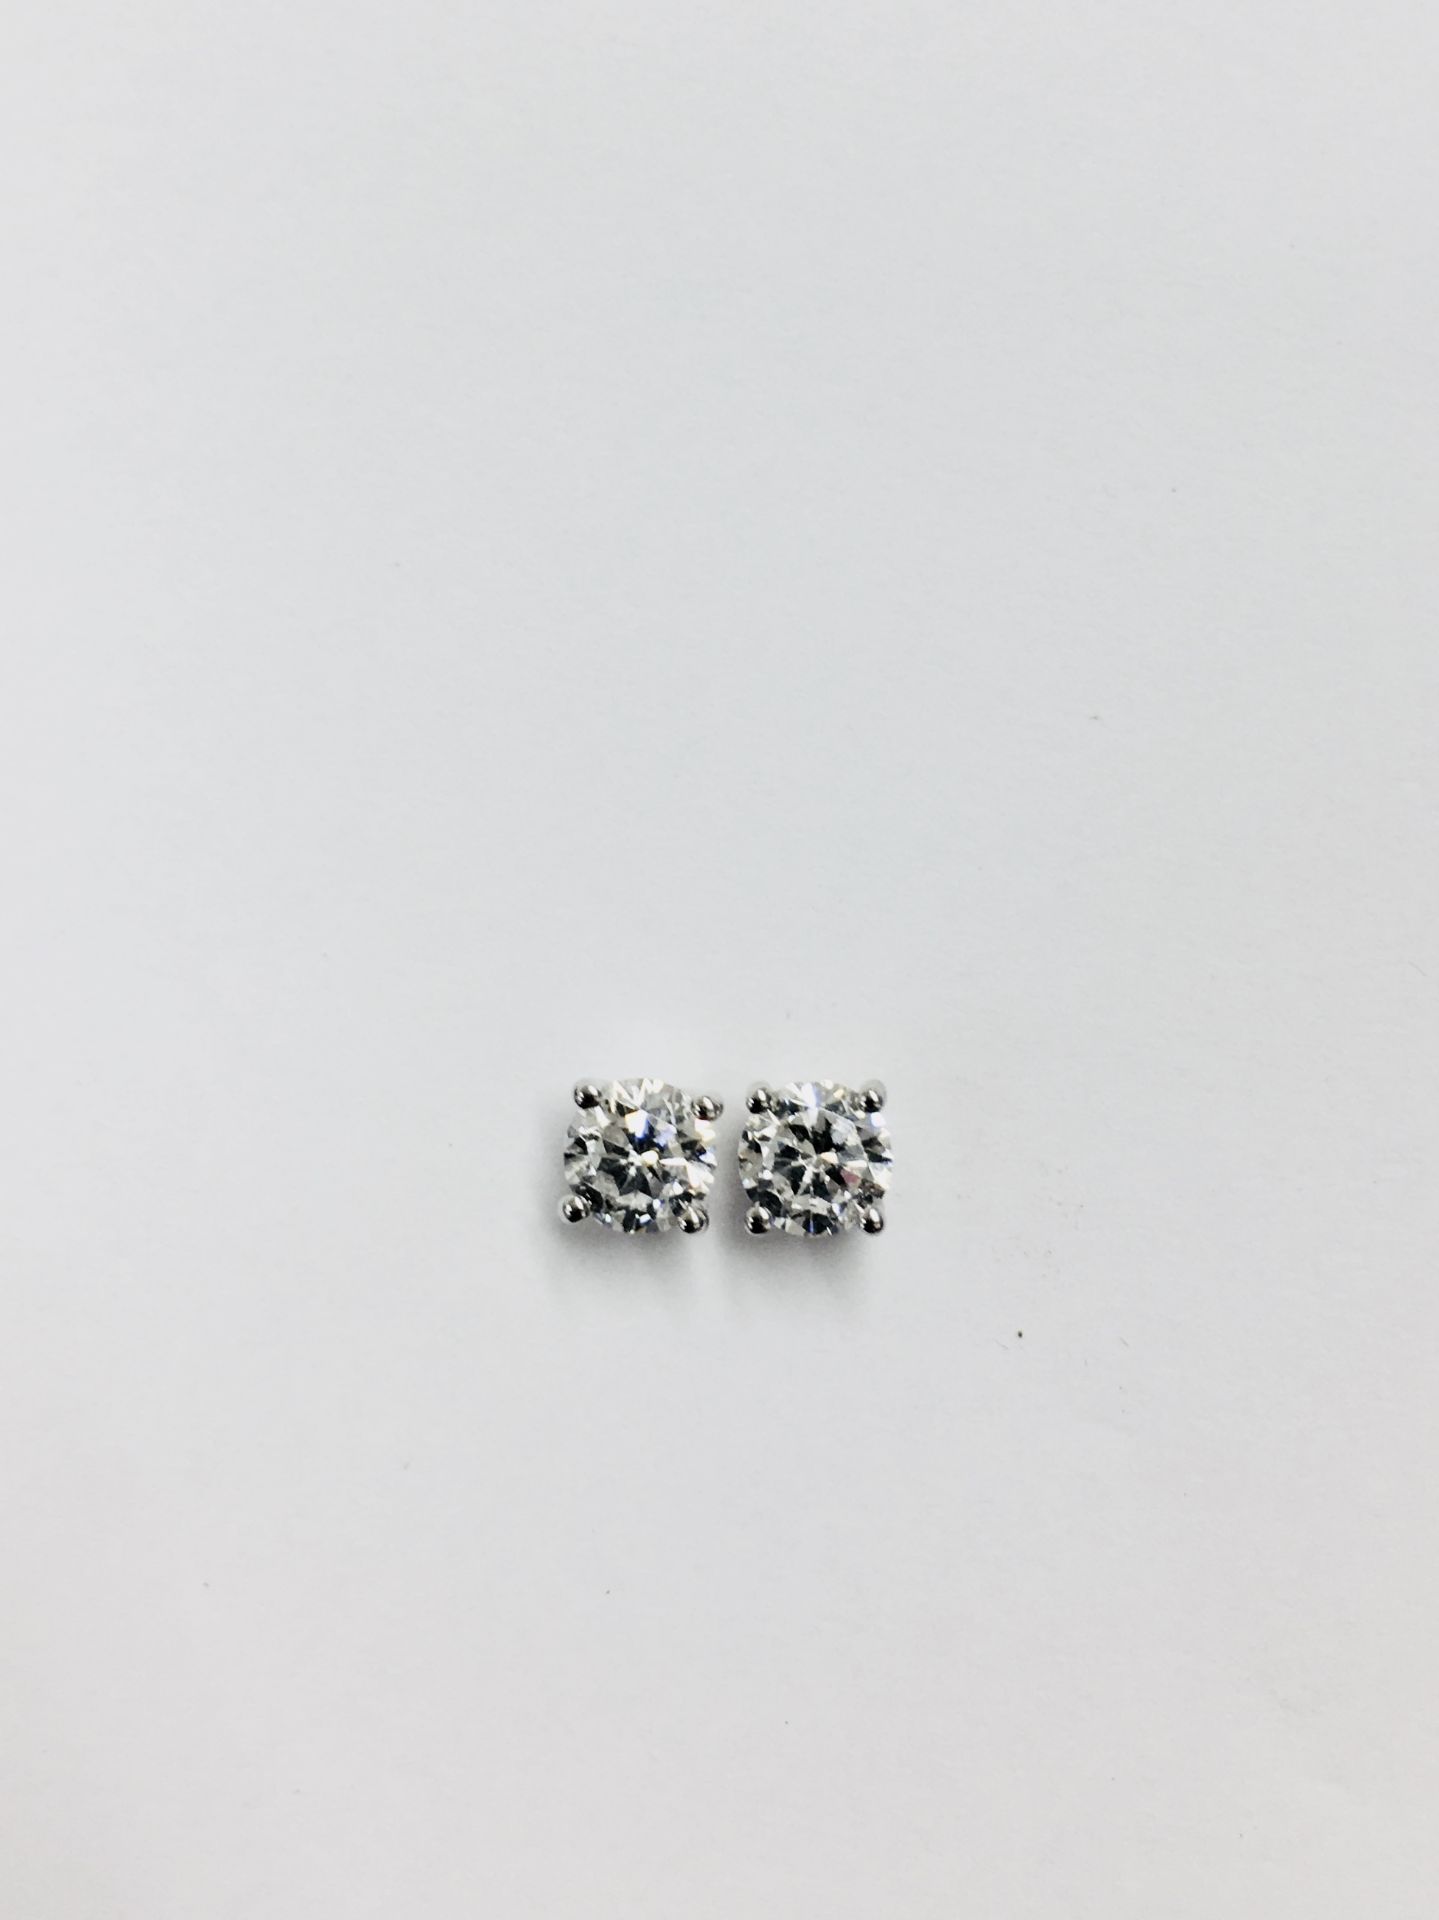 0.50ct Solitaire diamond stud earrings set with brilliant cut diamonds, i1 clarity and I colour. Set